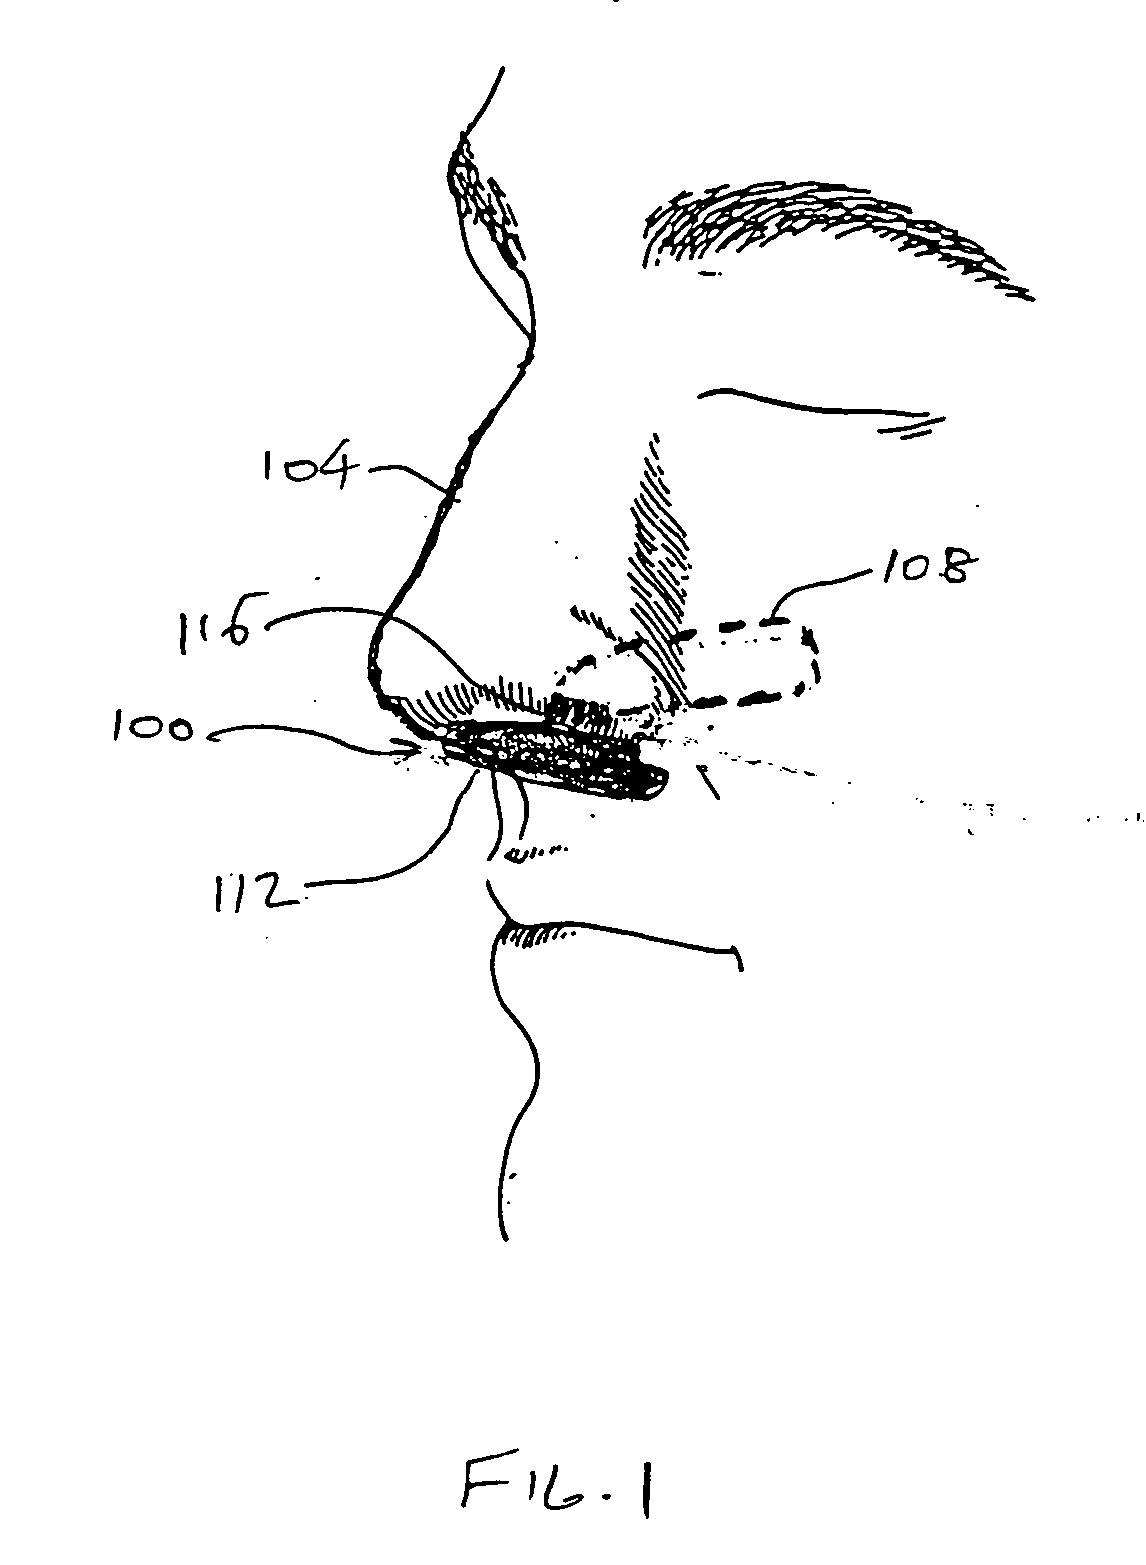 Nose pack method and apparatus